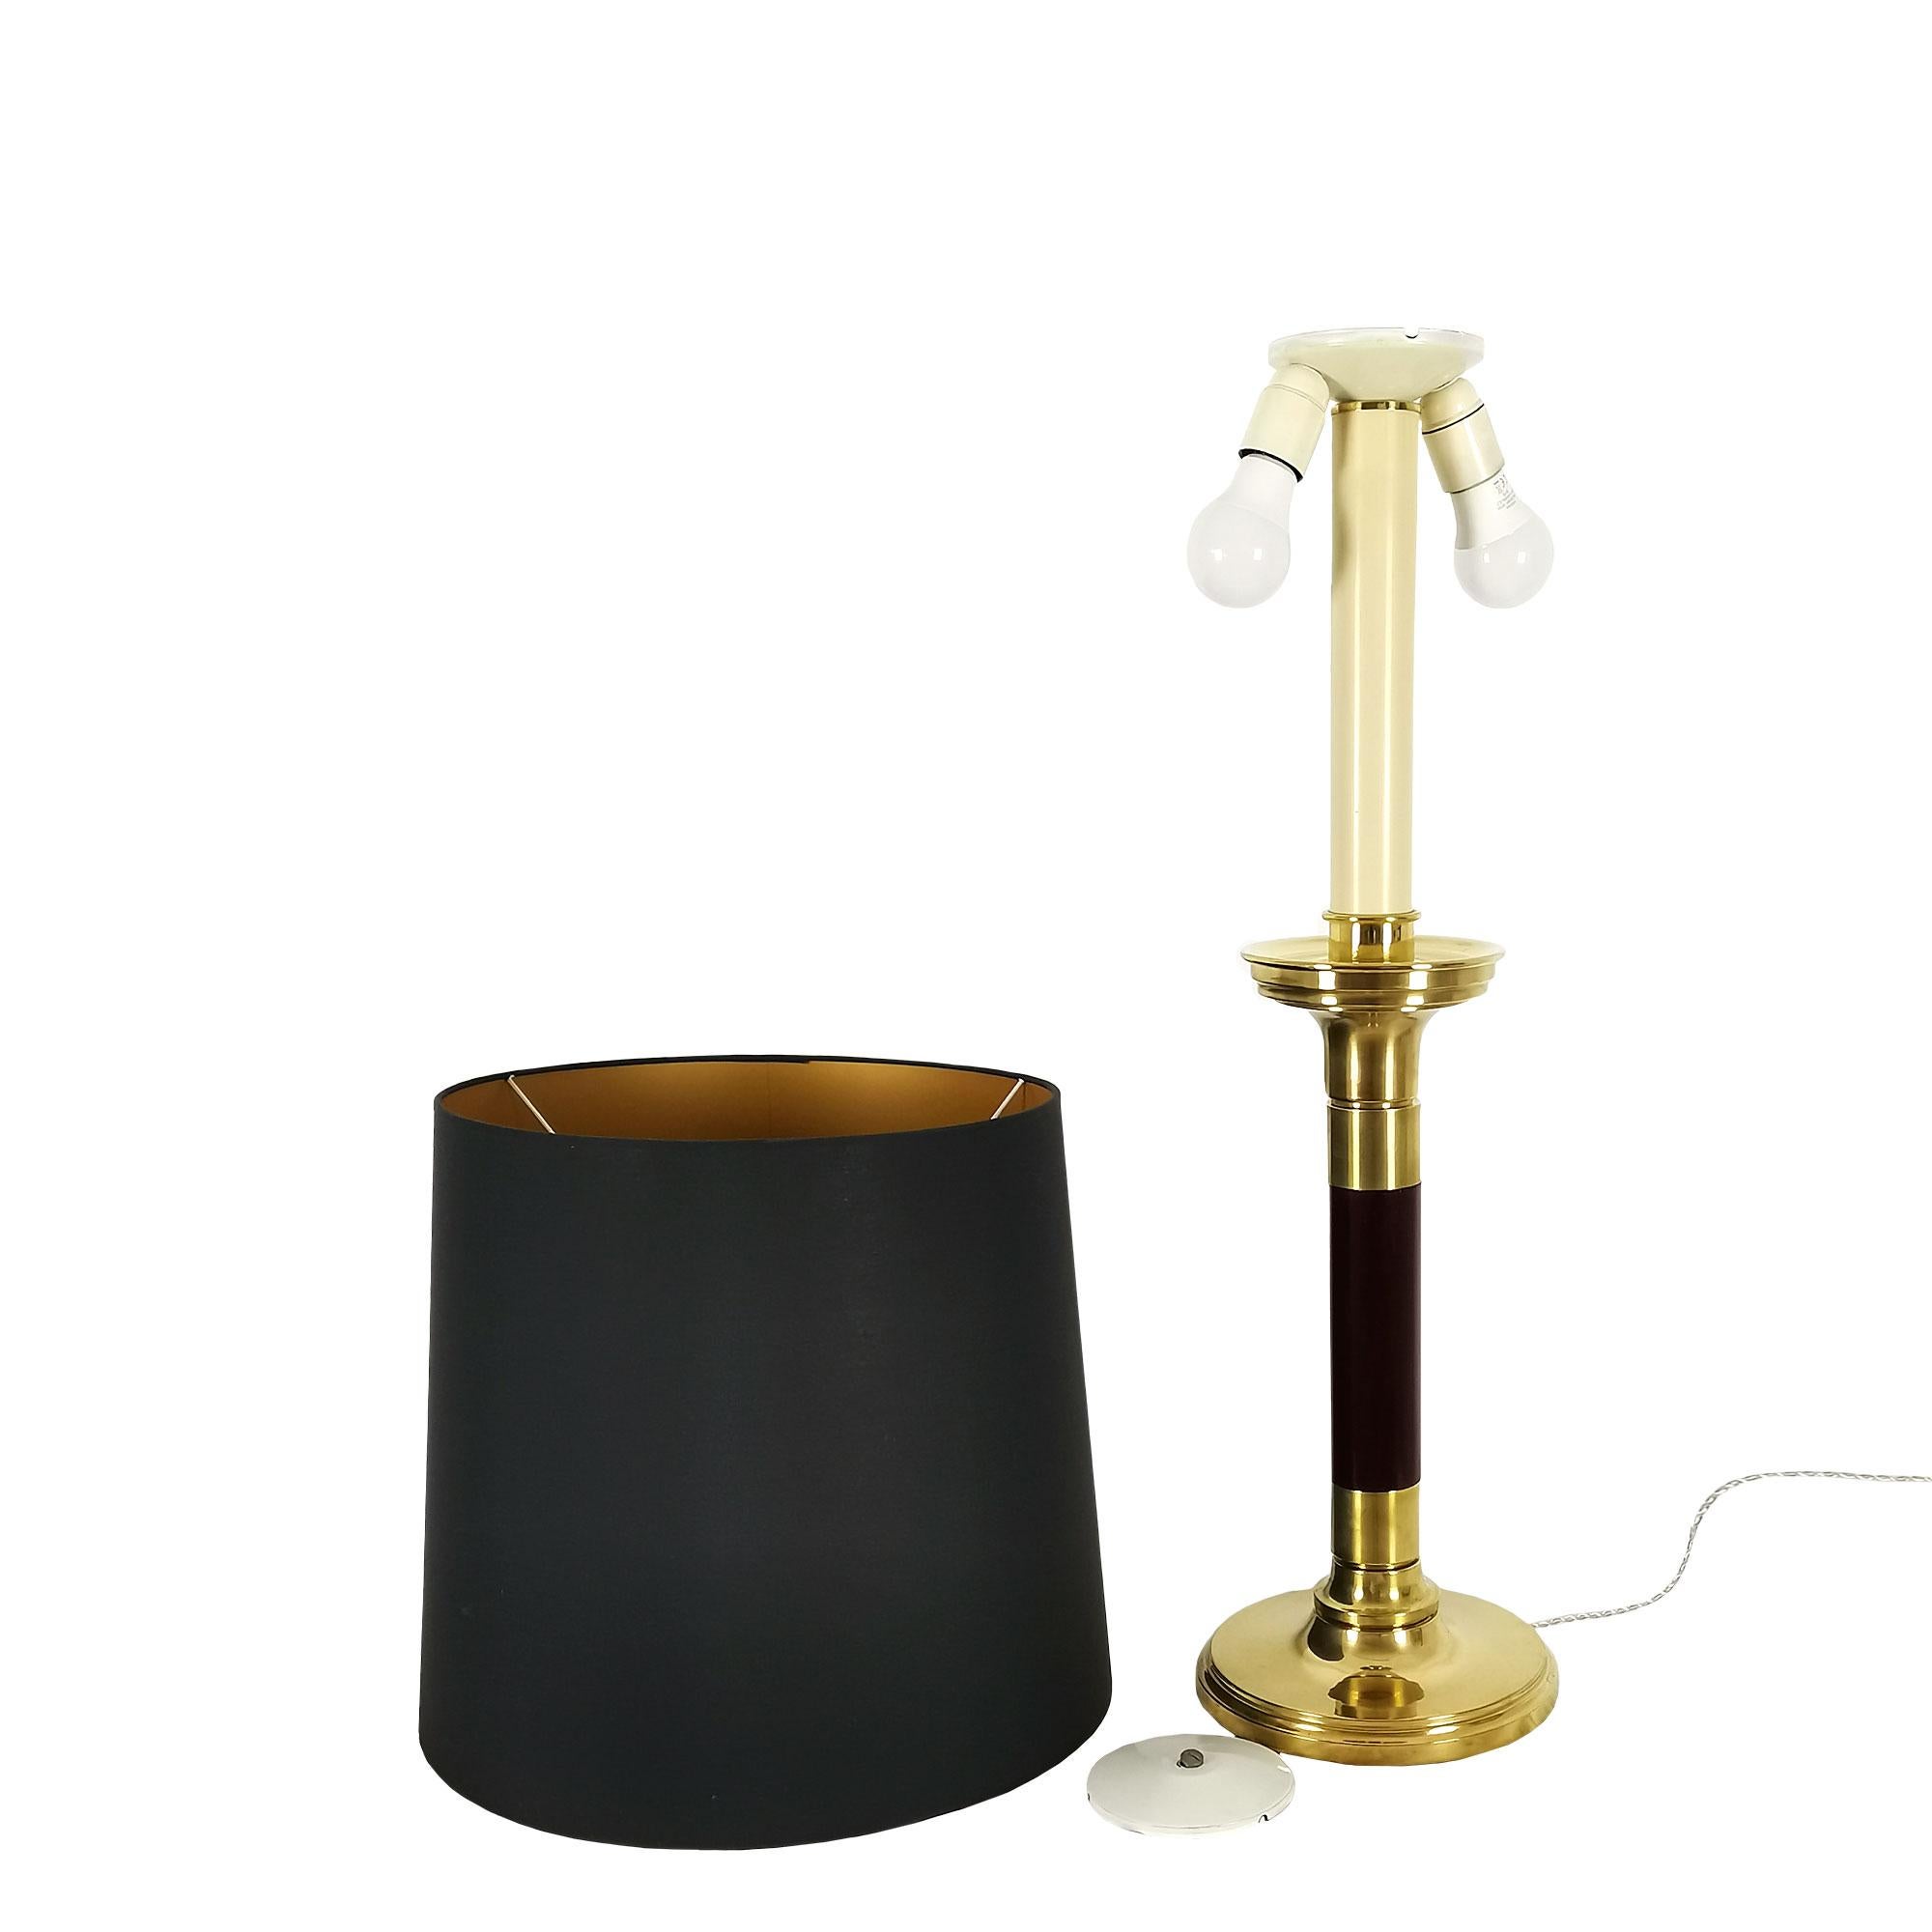 Spanish Pair of Mid-Century Modern Table Lamps by Clar, Mahogany and Brass - Barcelona For Sale